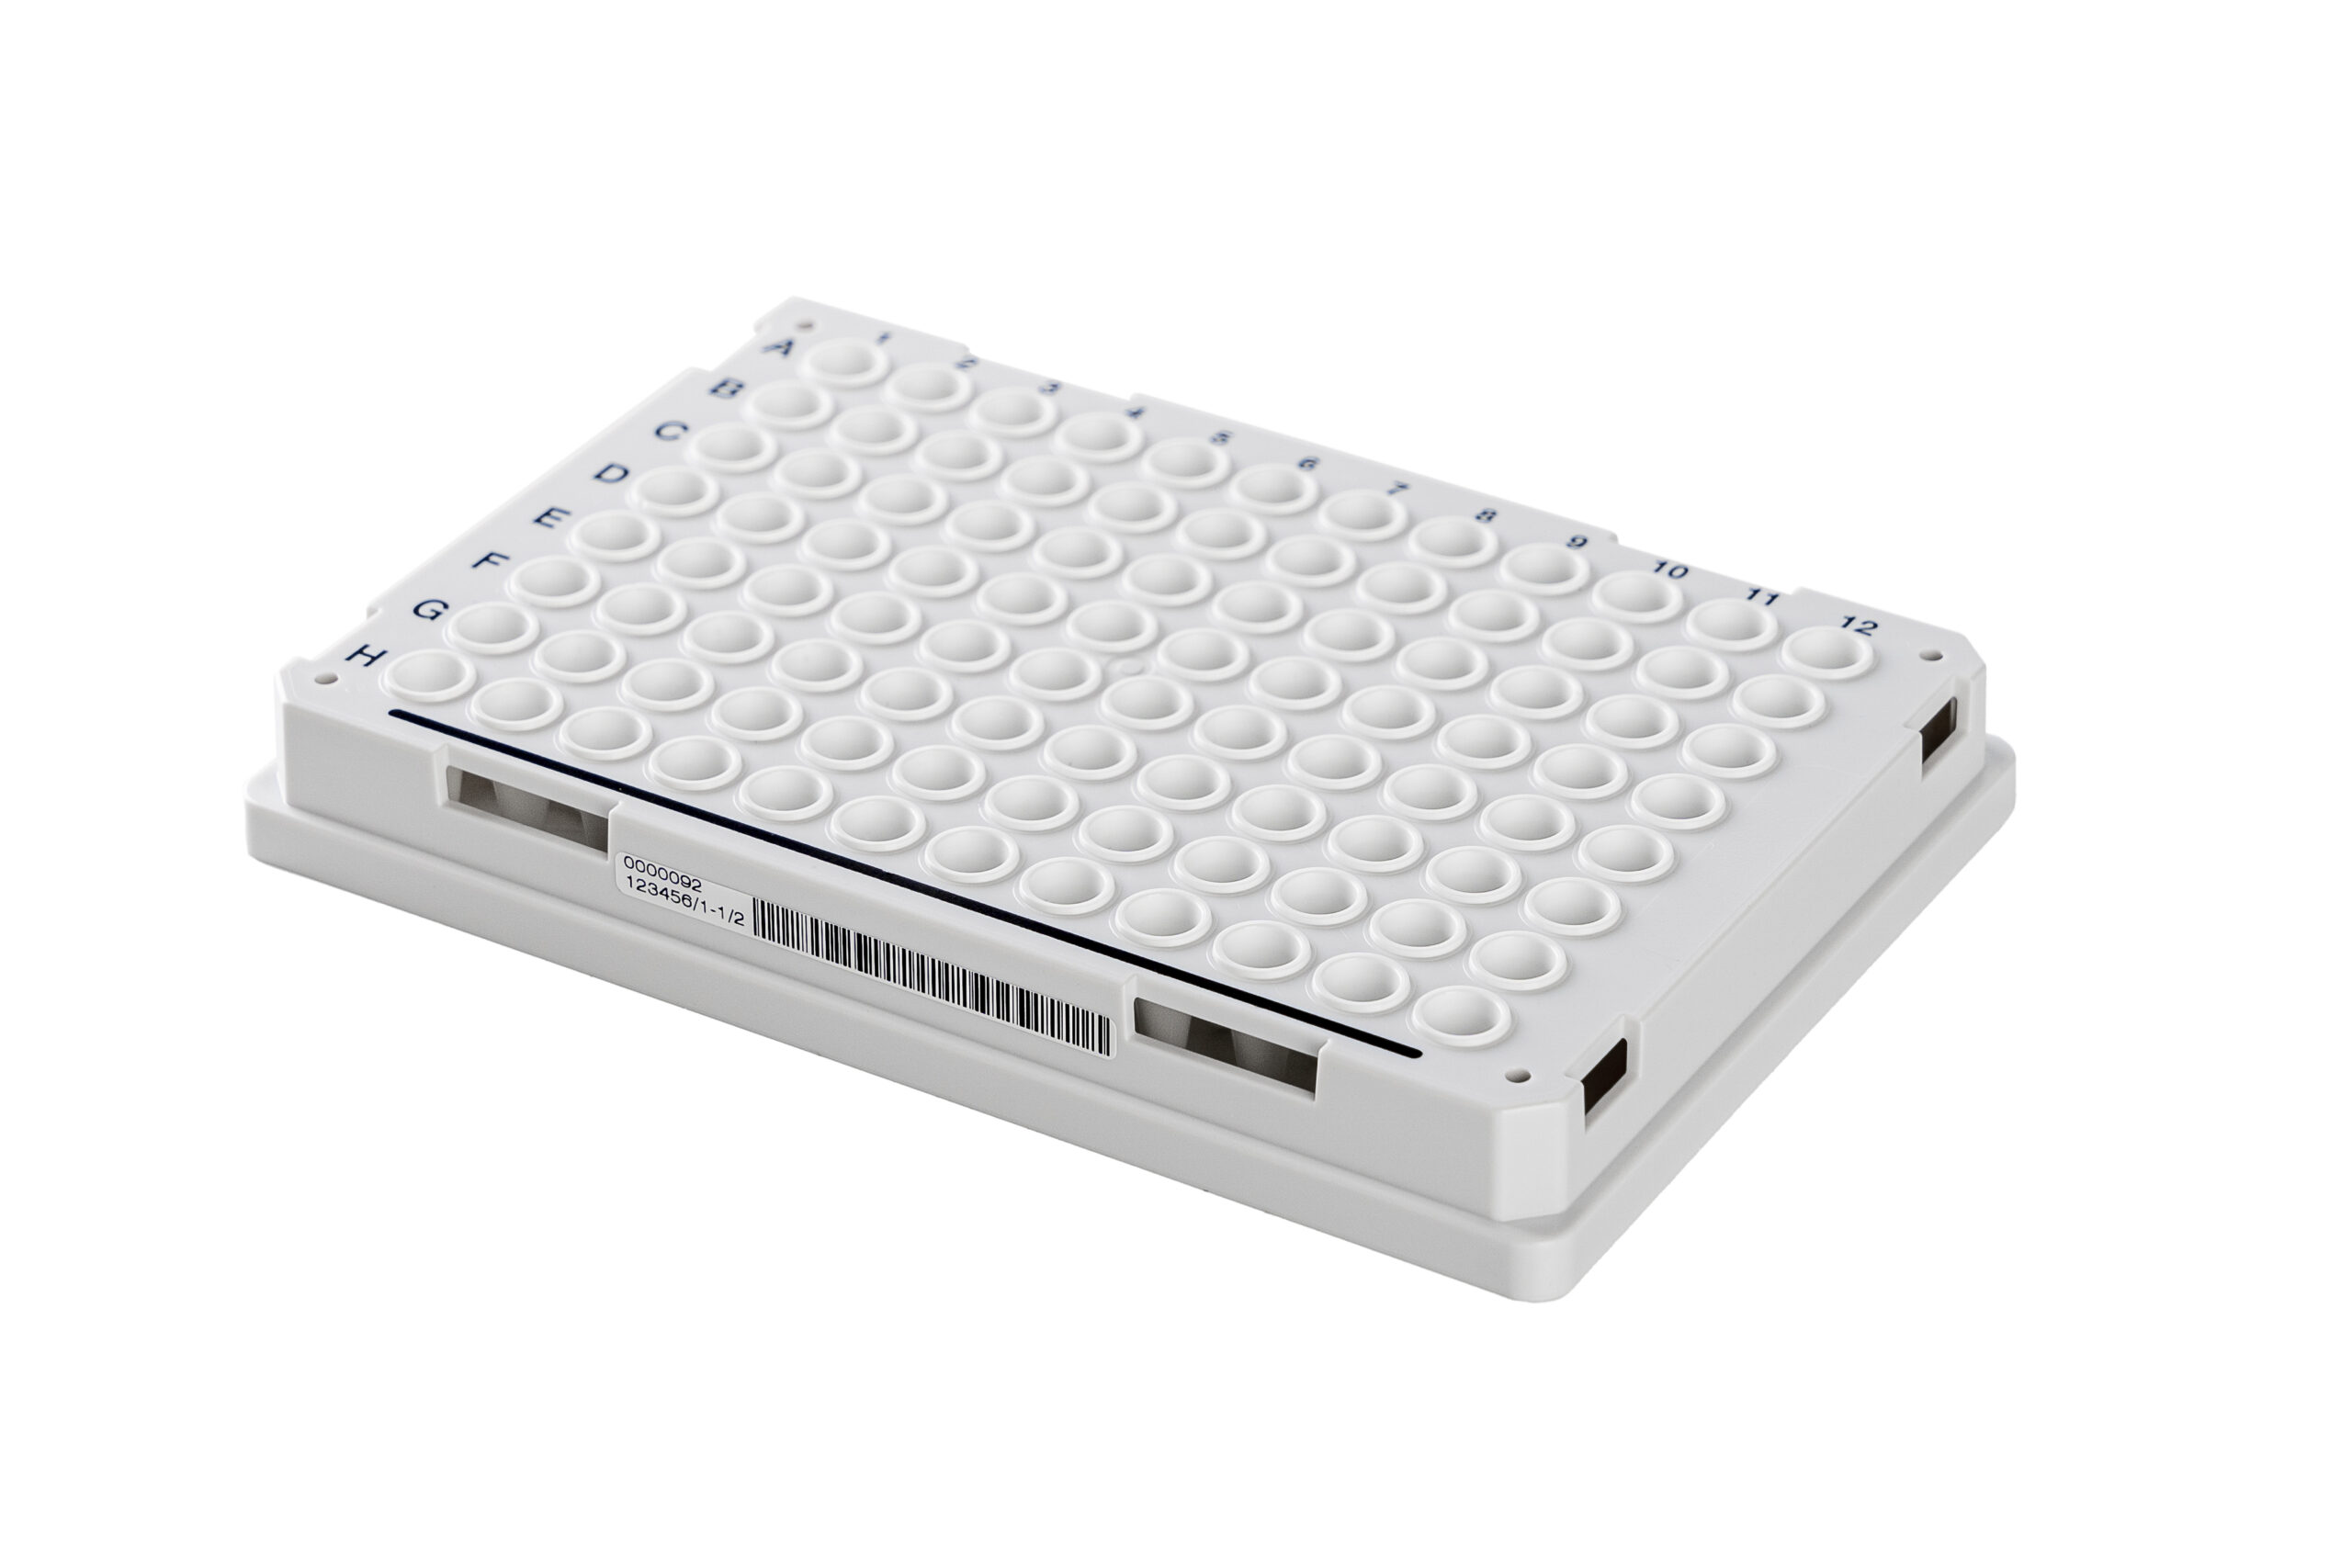 Ritter Medical develops composite riplate® 96-well plates for fully automated robotic PCR screening